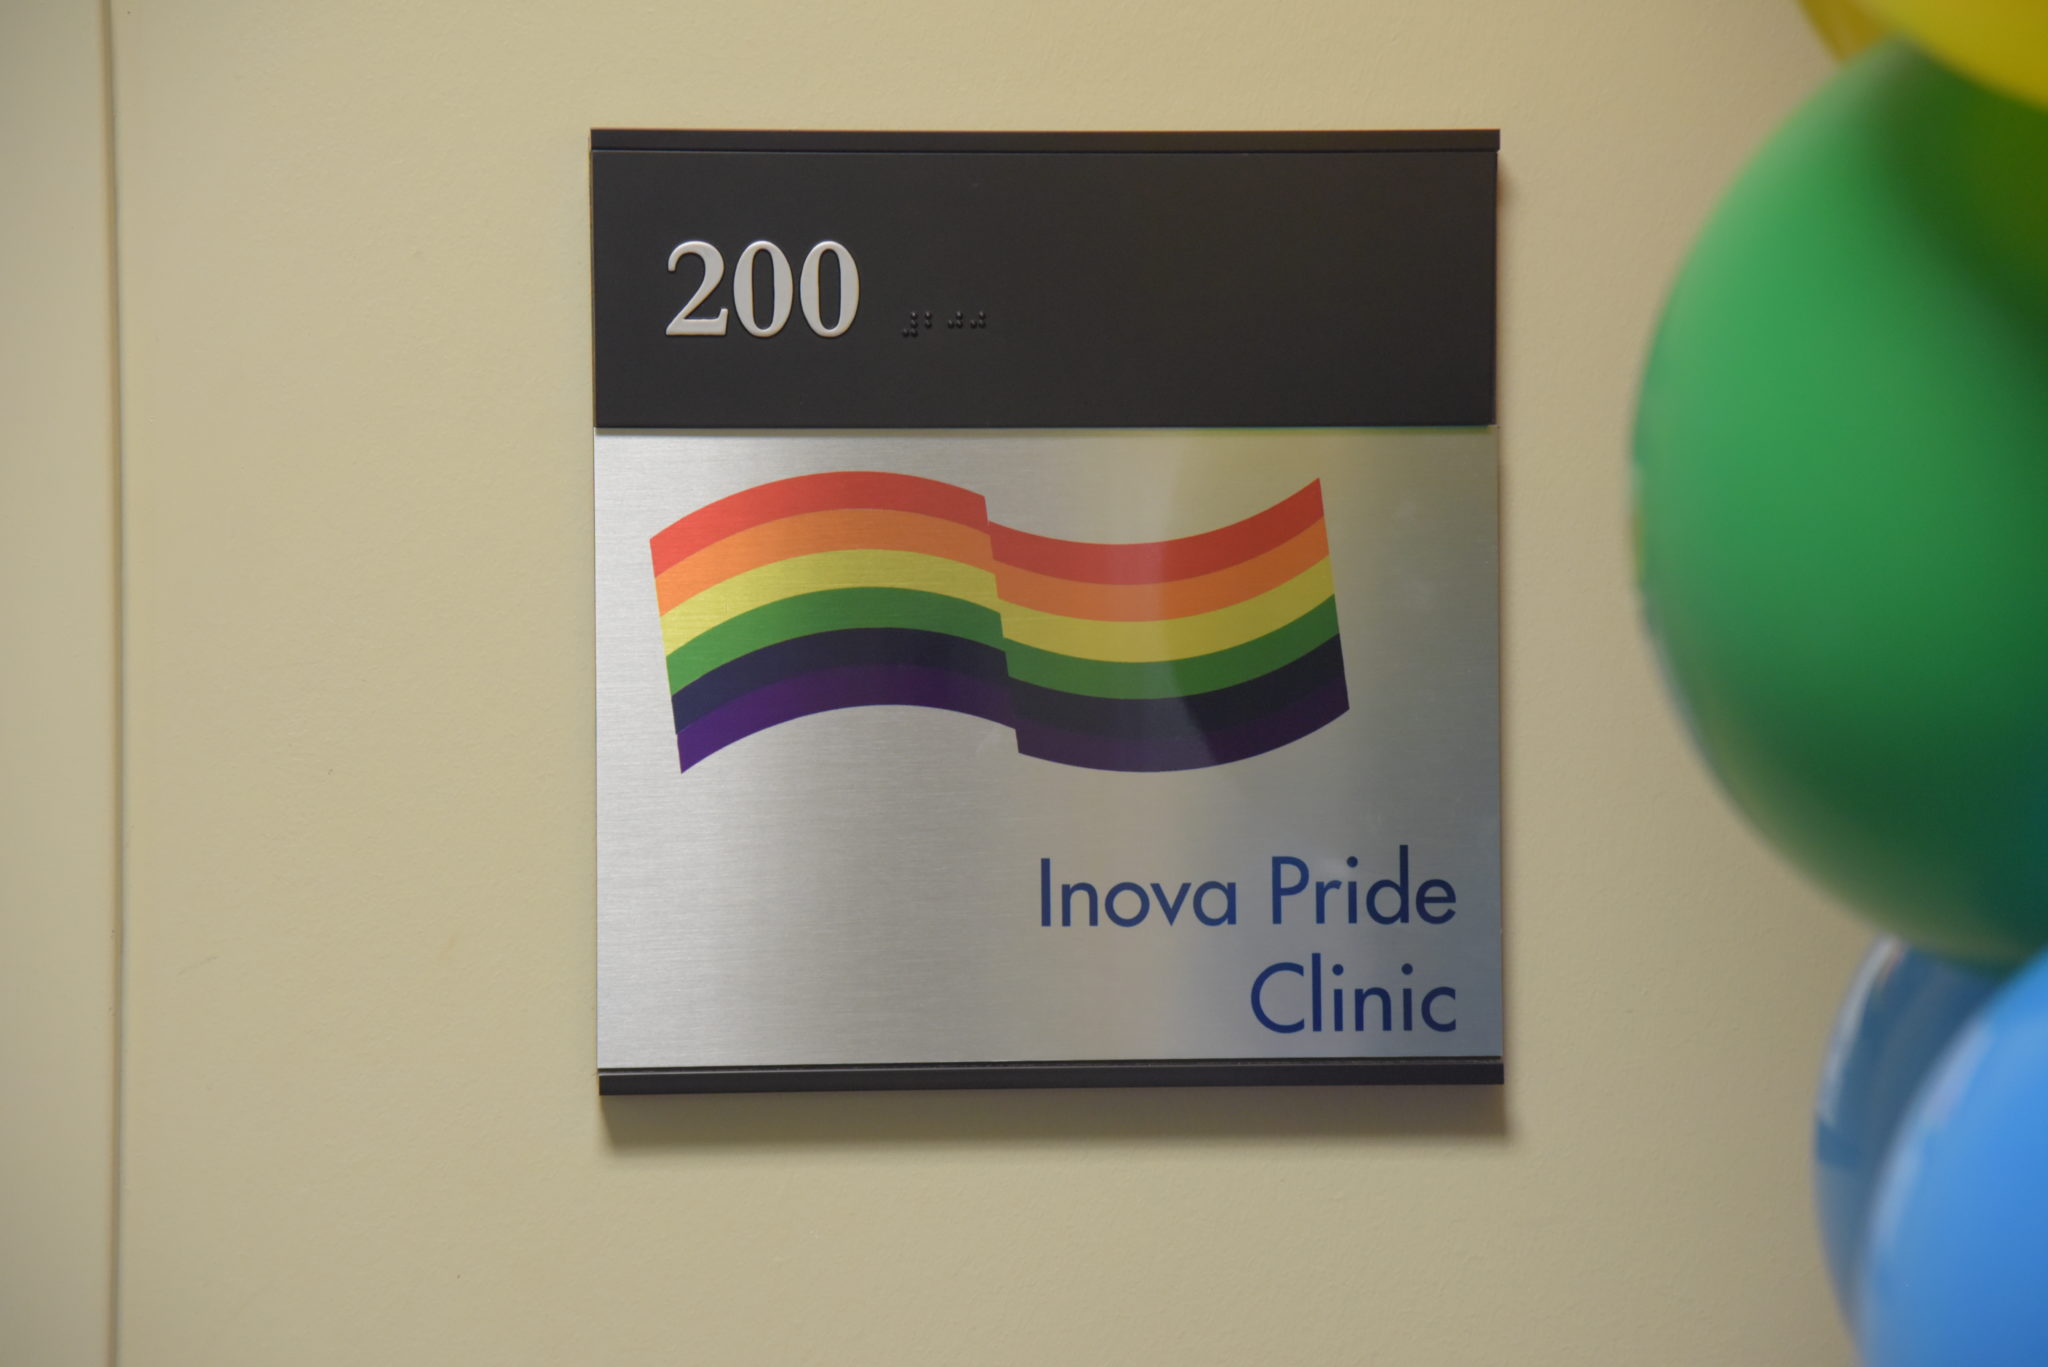 a sign on a door that reads 200, Inova Pride Clinic, with a rainbow flag on it